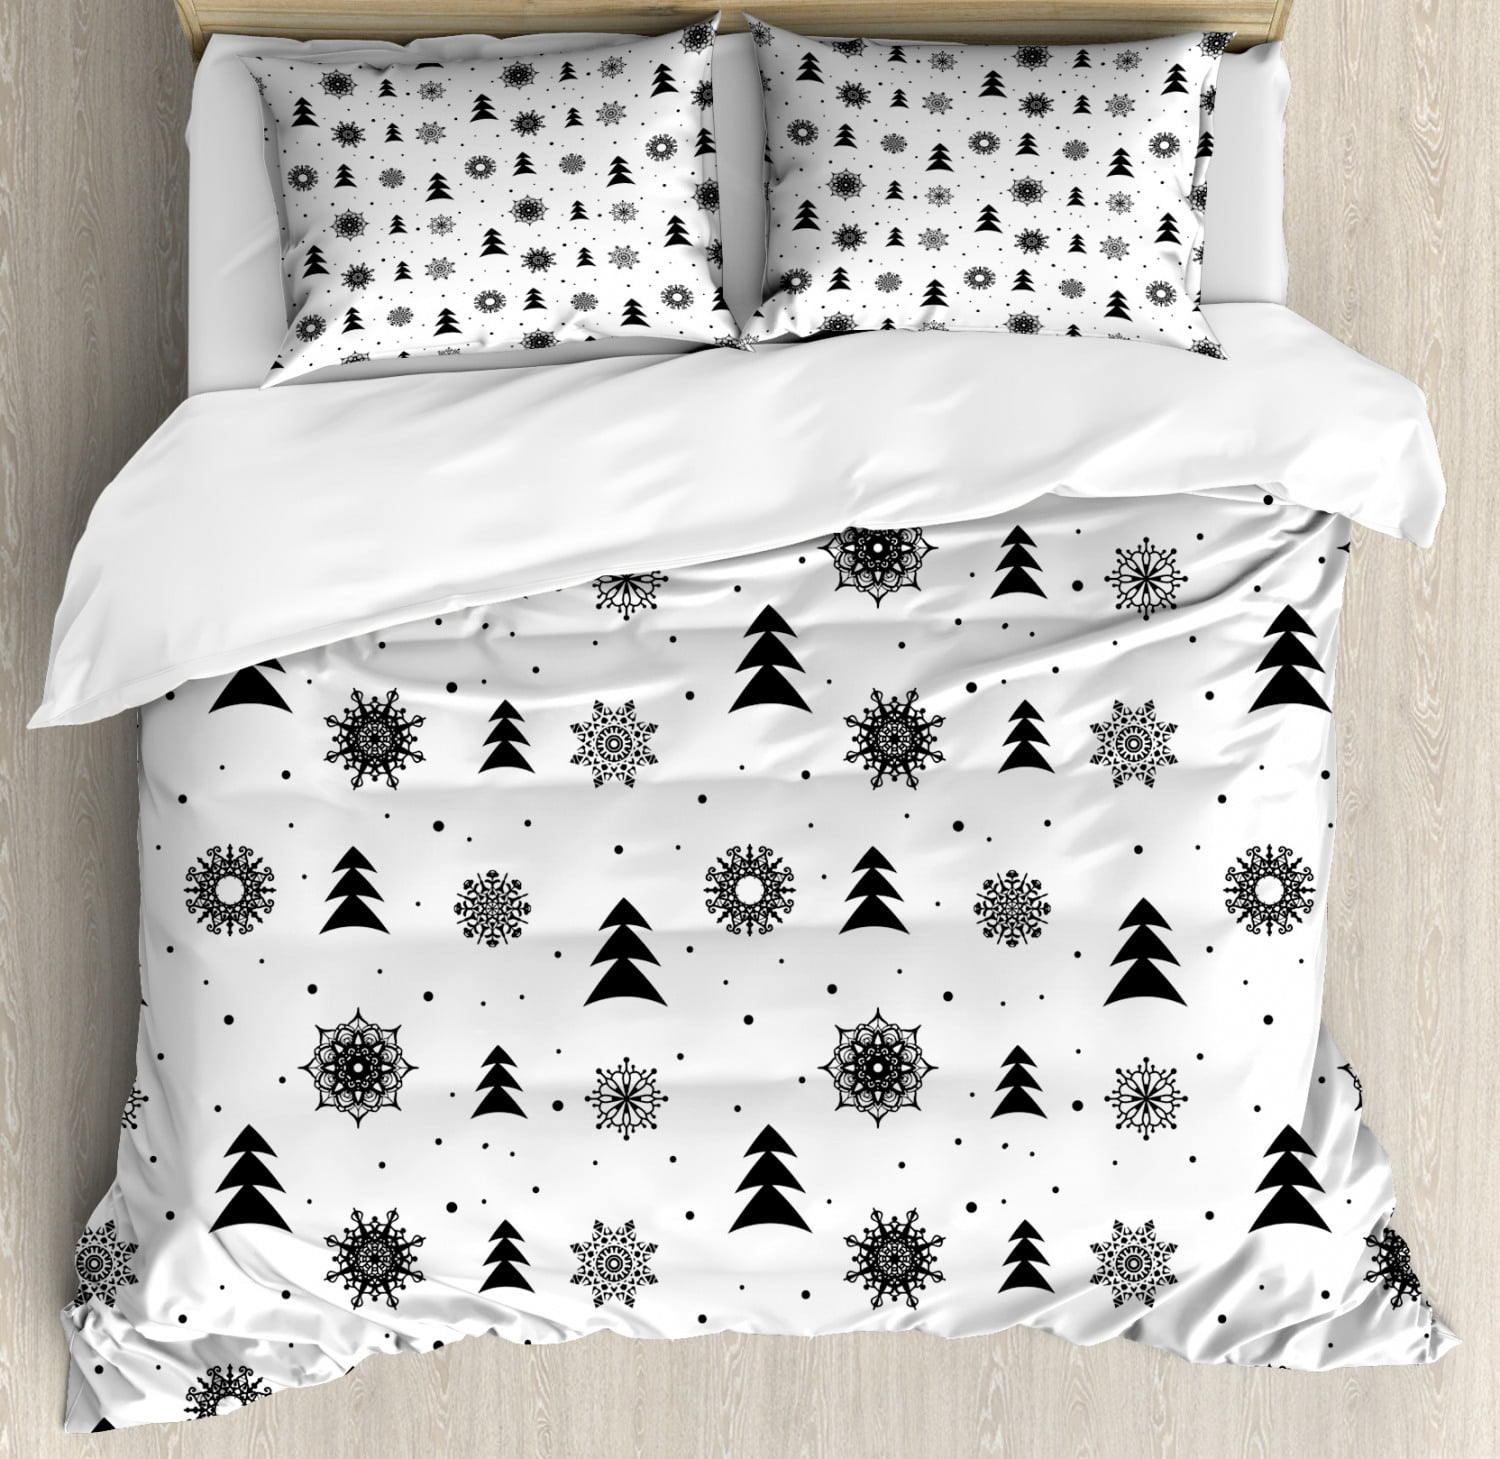 Nordic Duvet Cover Set Queen Size, Christmas Pine Trees Snowflakes Noel  Winter North Holiday Celebration Graphic Art, Decorative 3 Piece Bedding  Set